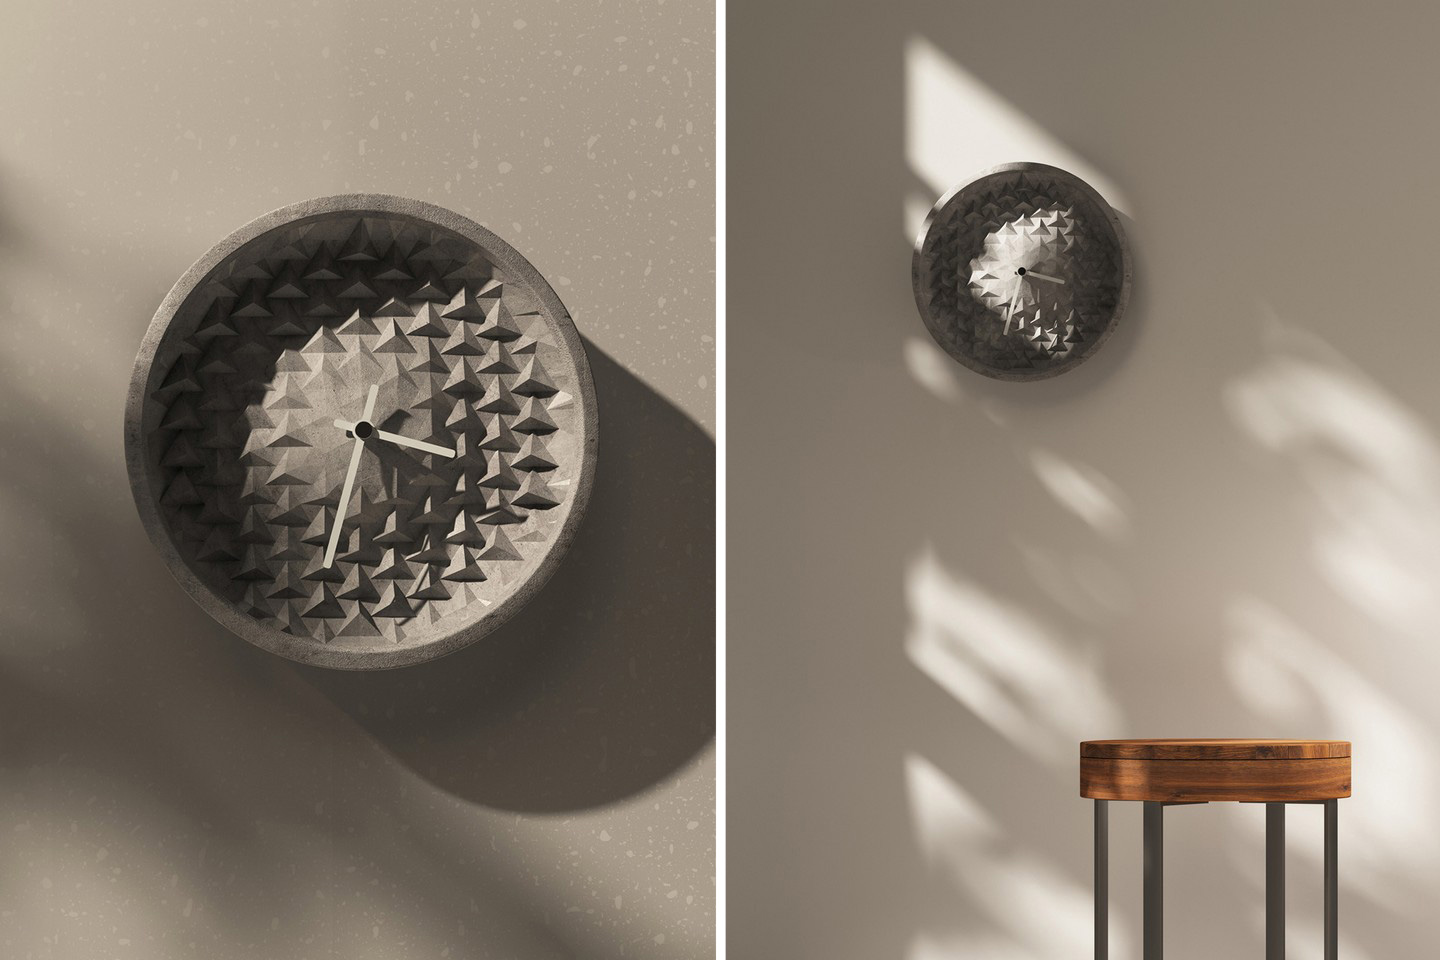 #This textured wall clock uses dynamic shadows that make its appearance change as the day passes